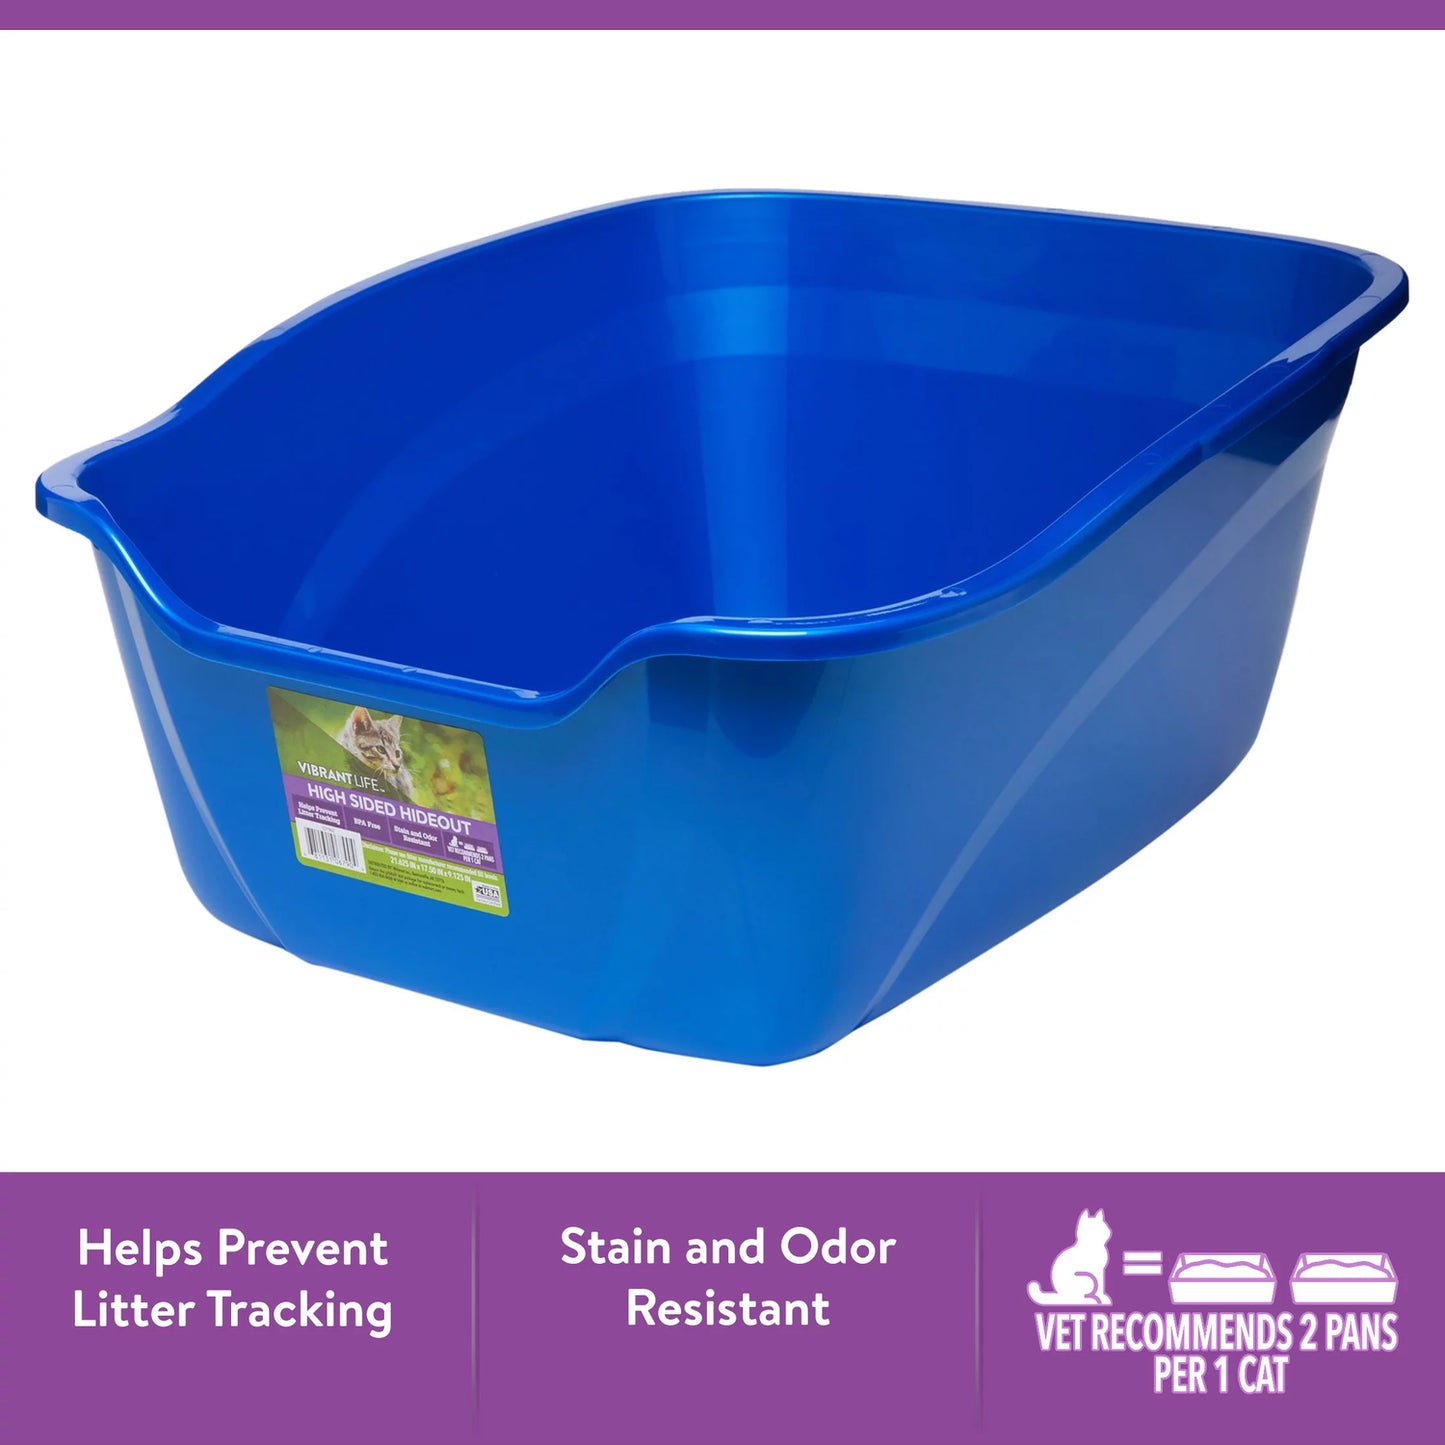 Vibrant Life High Sided Hideout Cat Litter Box, Blue